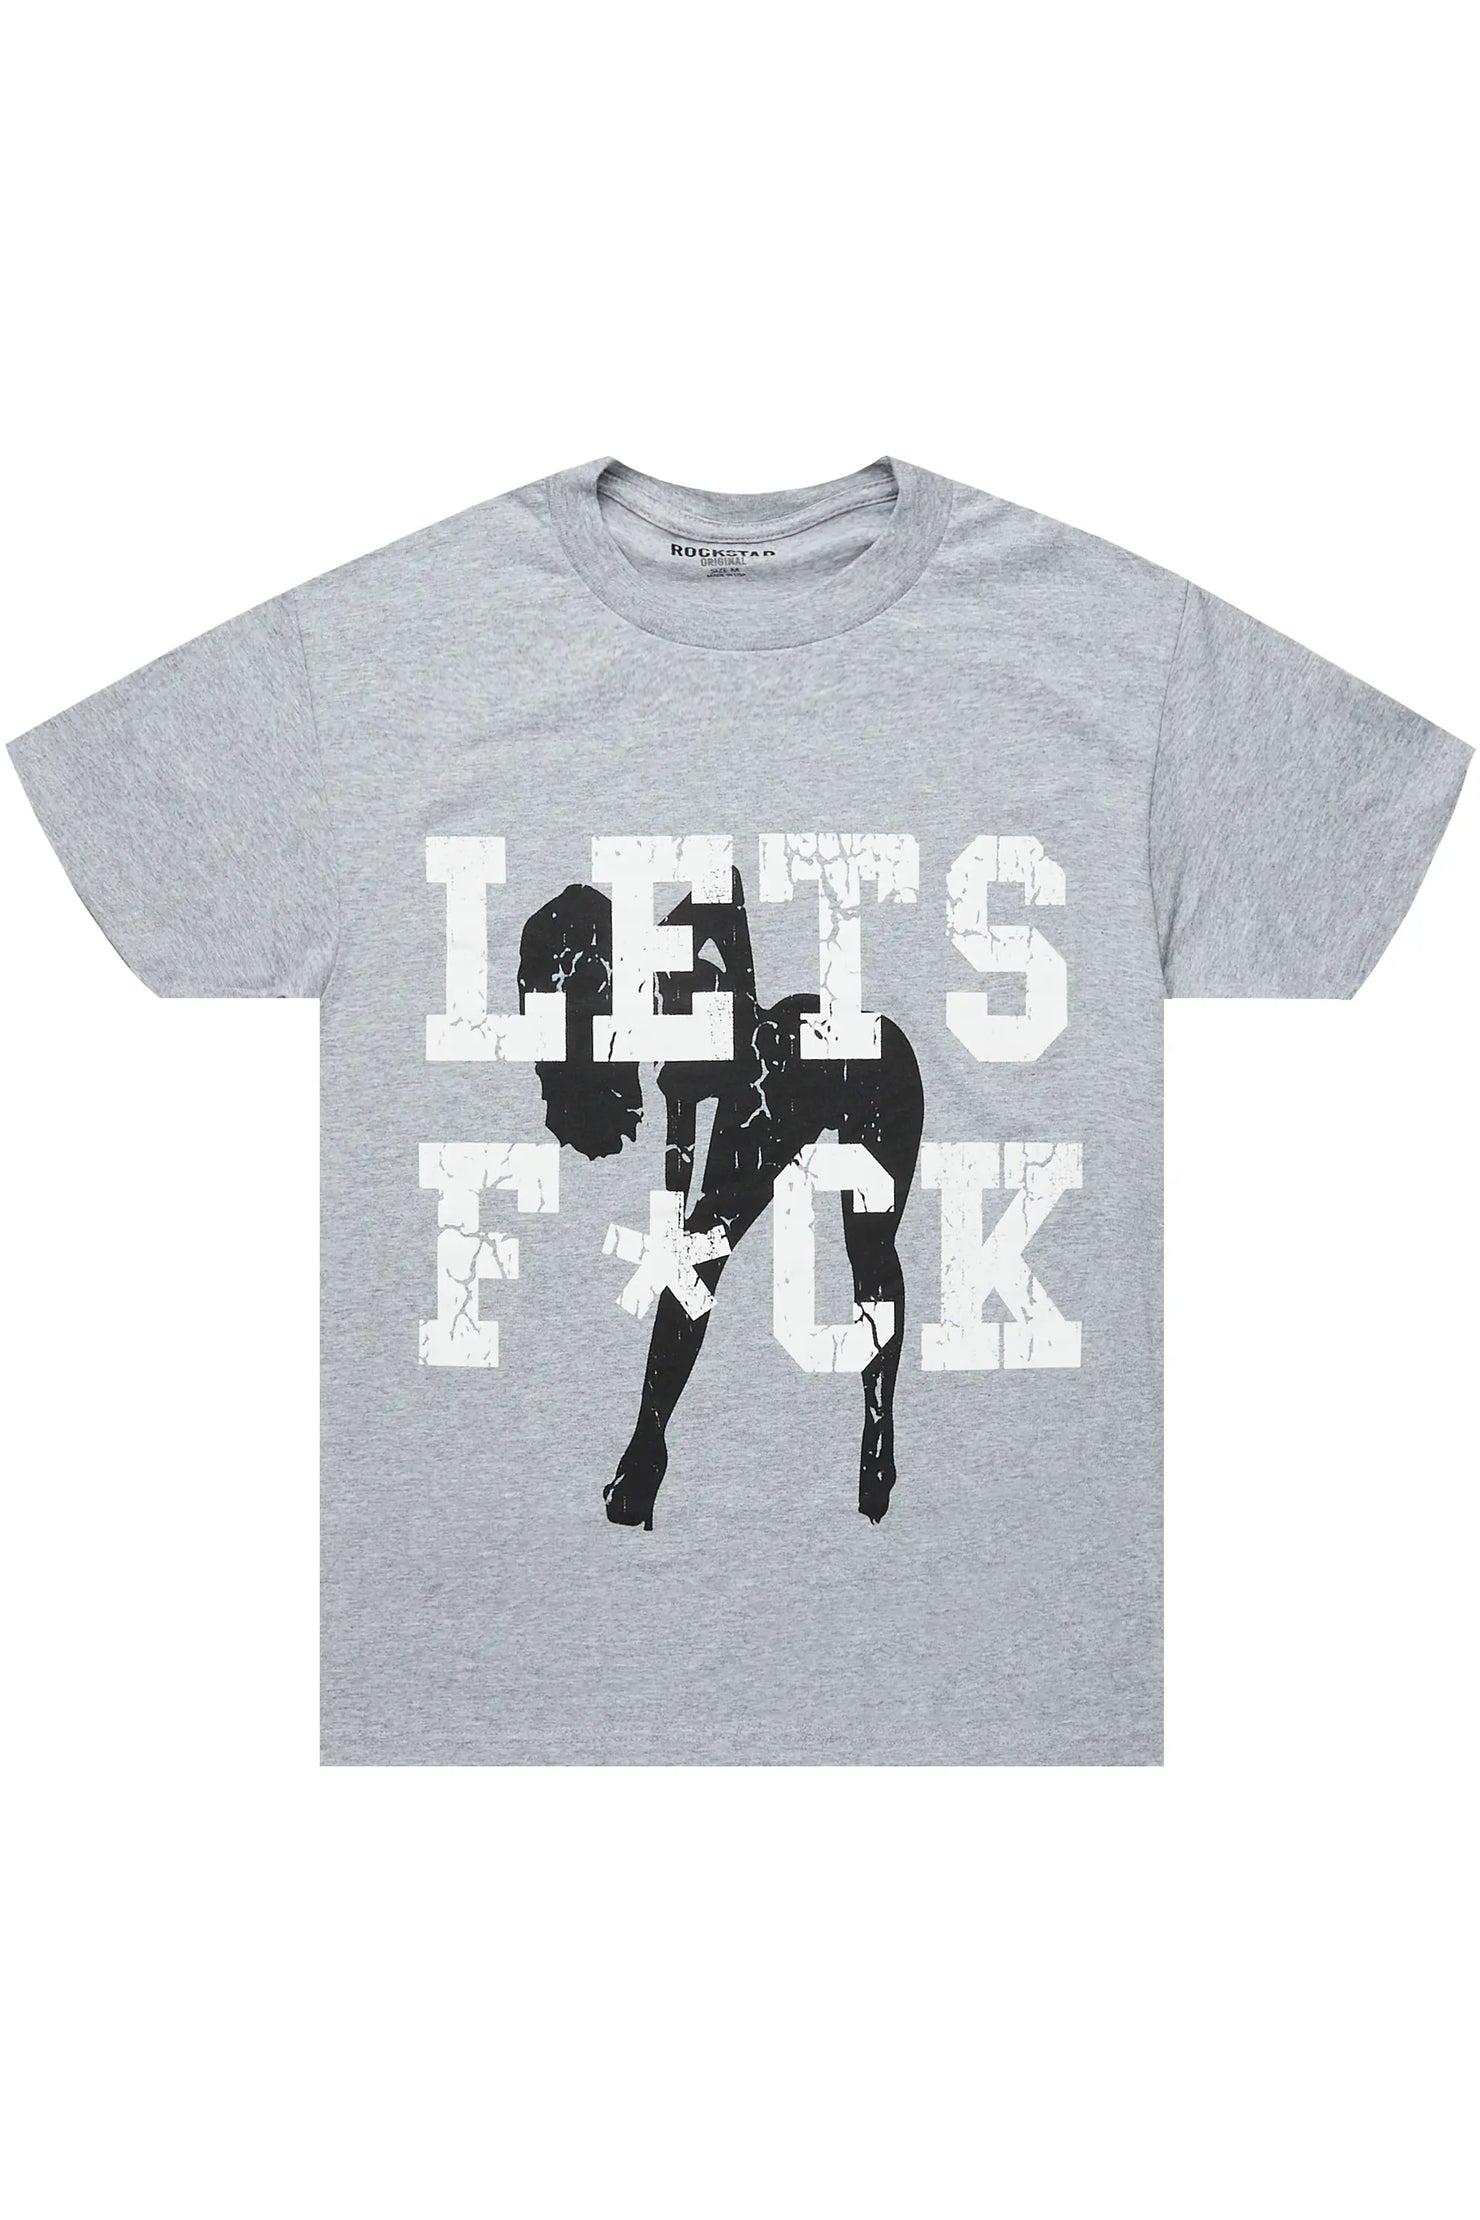 Shorty Heather Grey Graphic T-Shirt